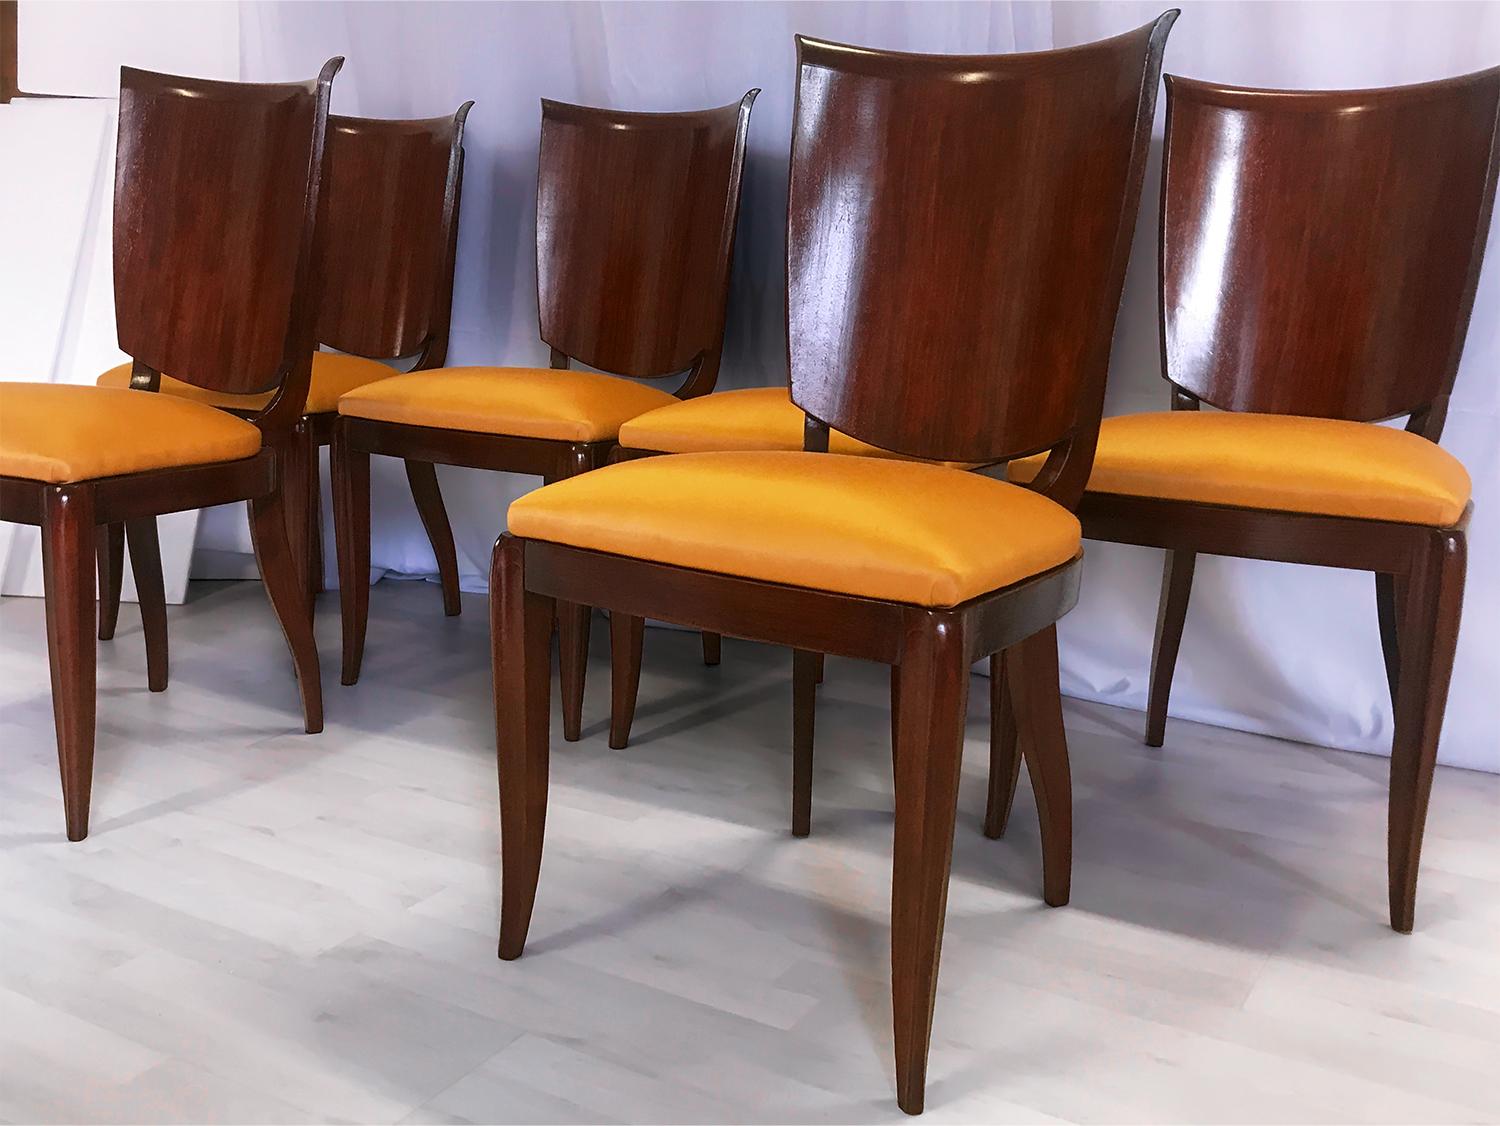 Italian Mid-Century Yellow Dining Chairs by Vittorio Dassi, Set of Six, 1950s For Sale 4